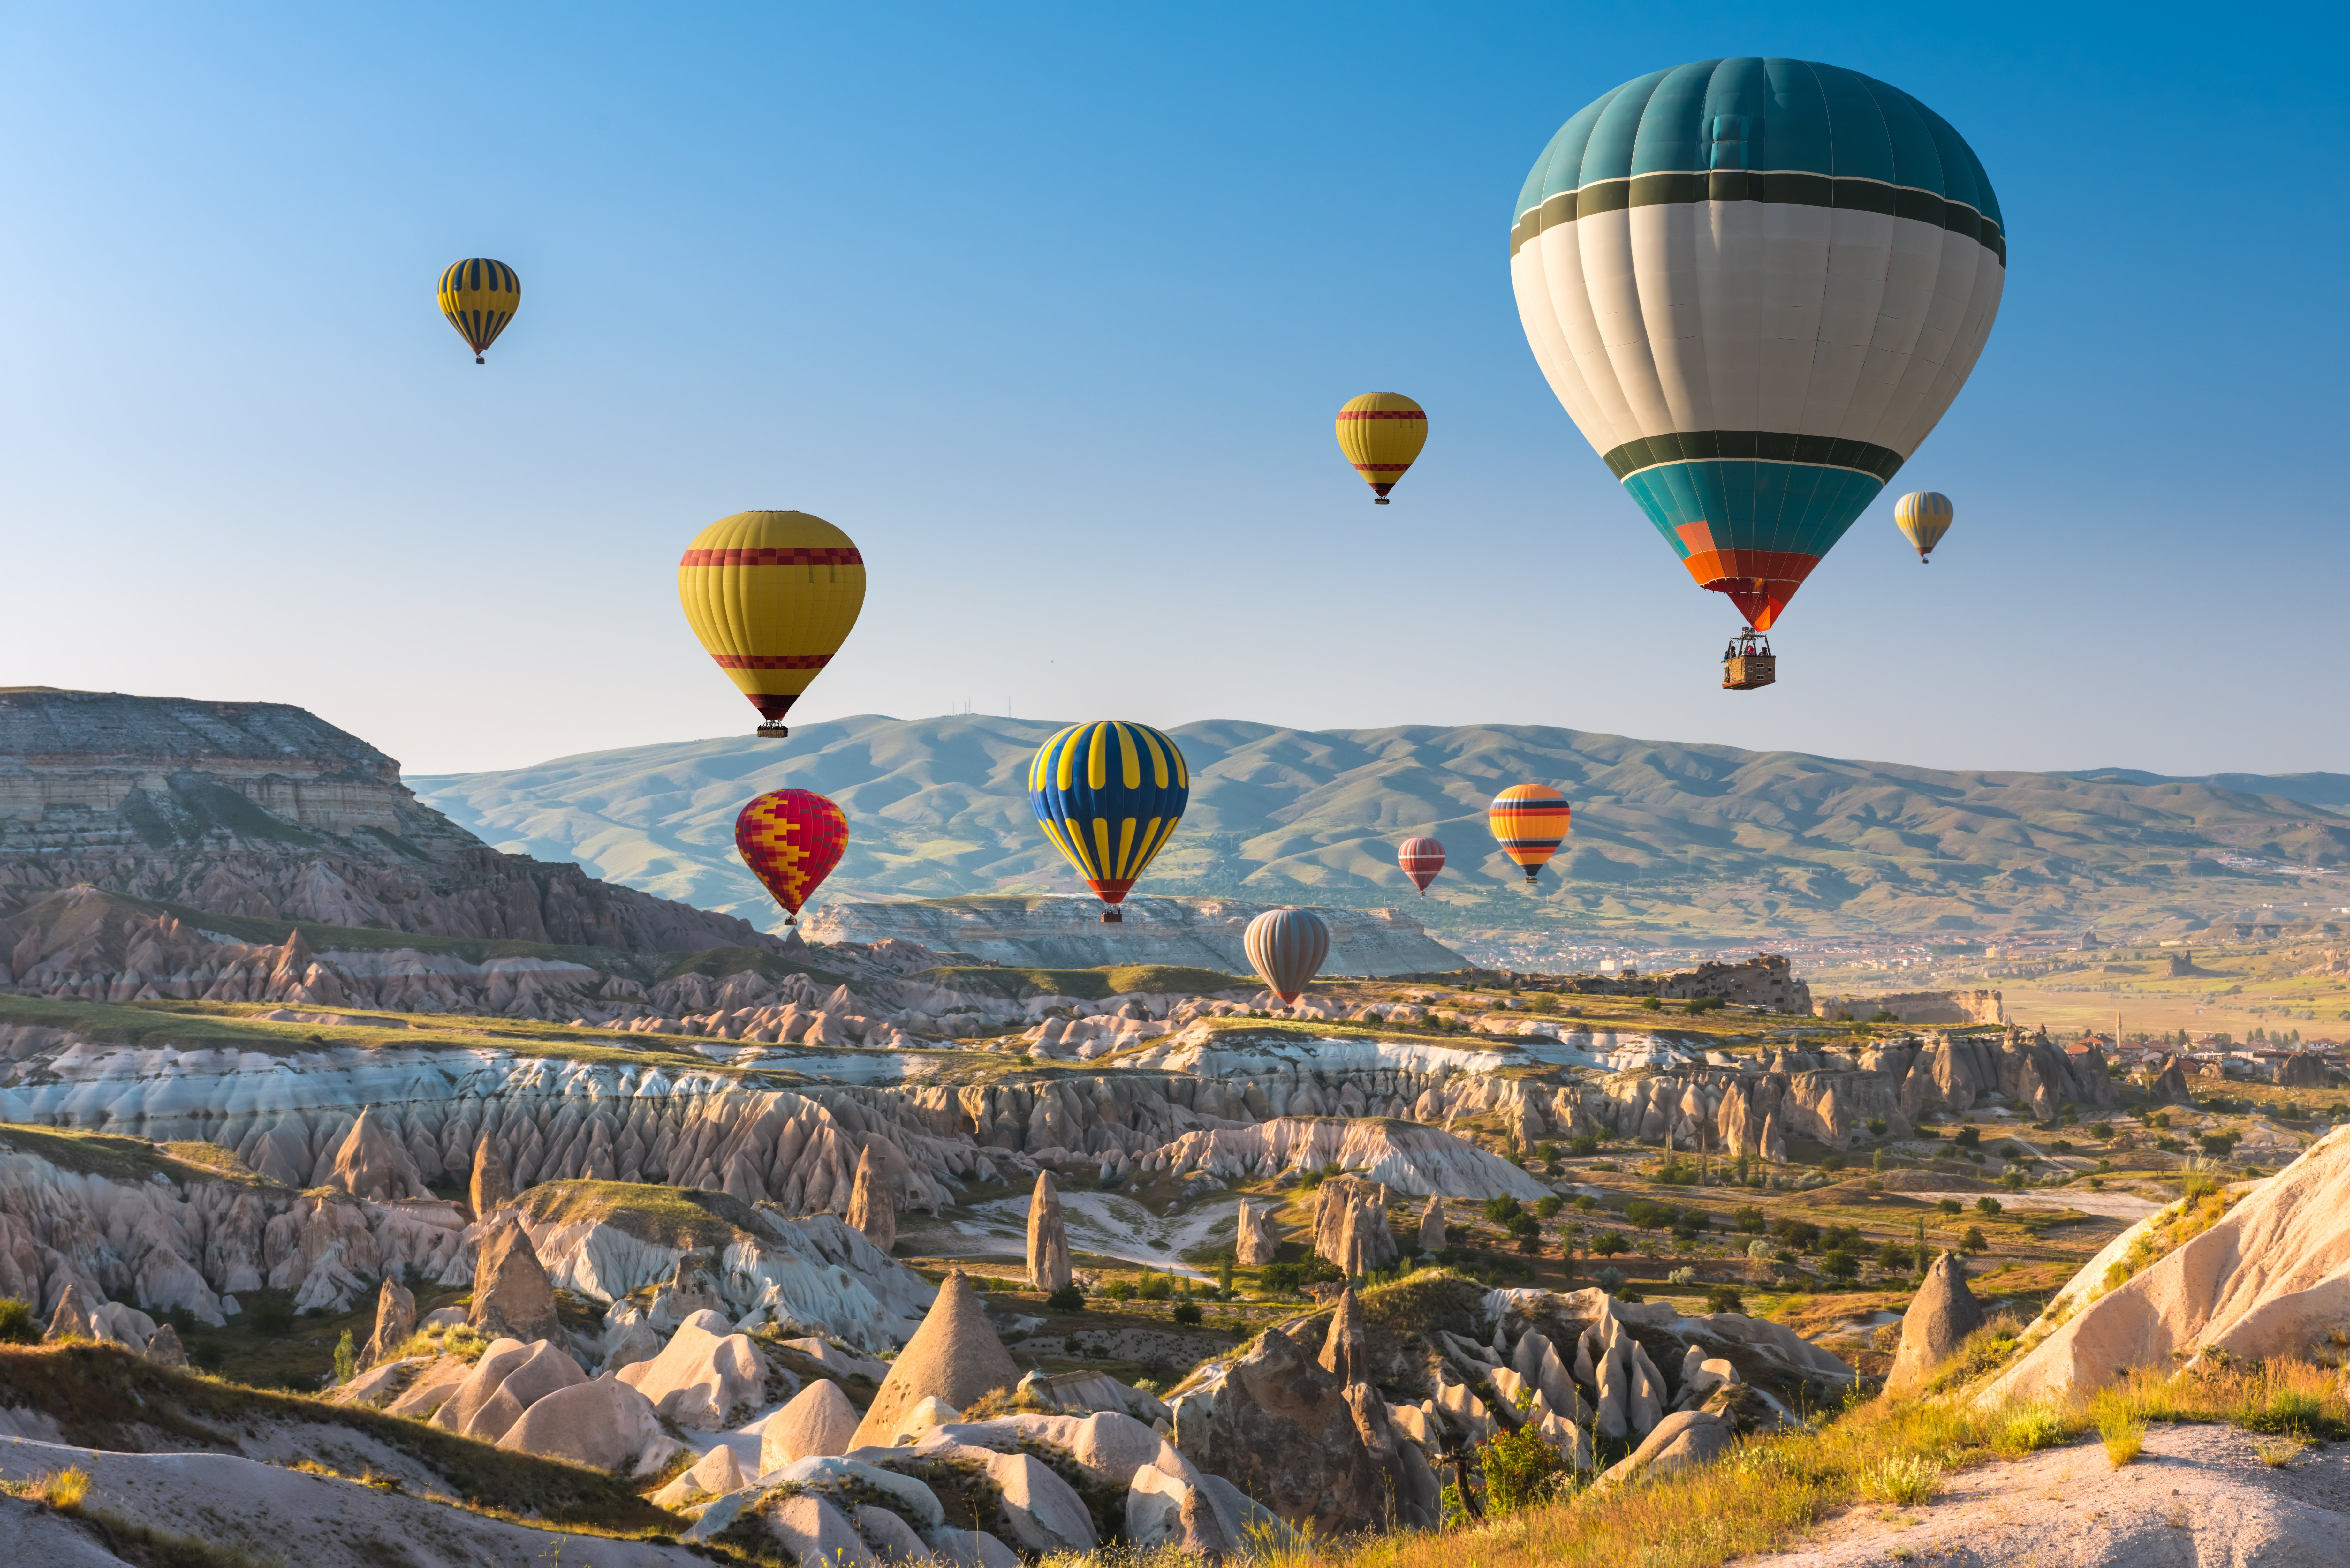 Thrill seekers will take to new heights in Cappadocia, Turkey